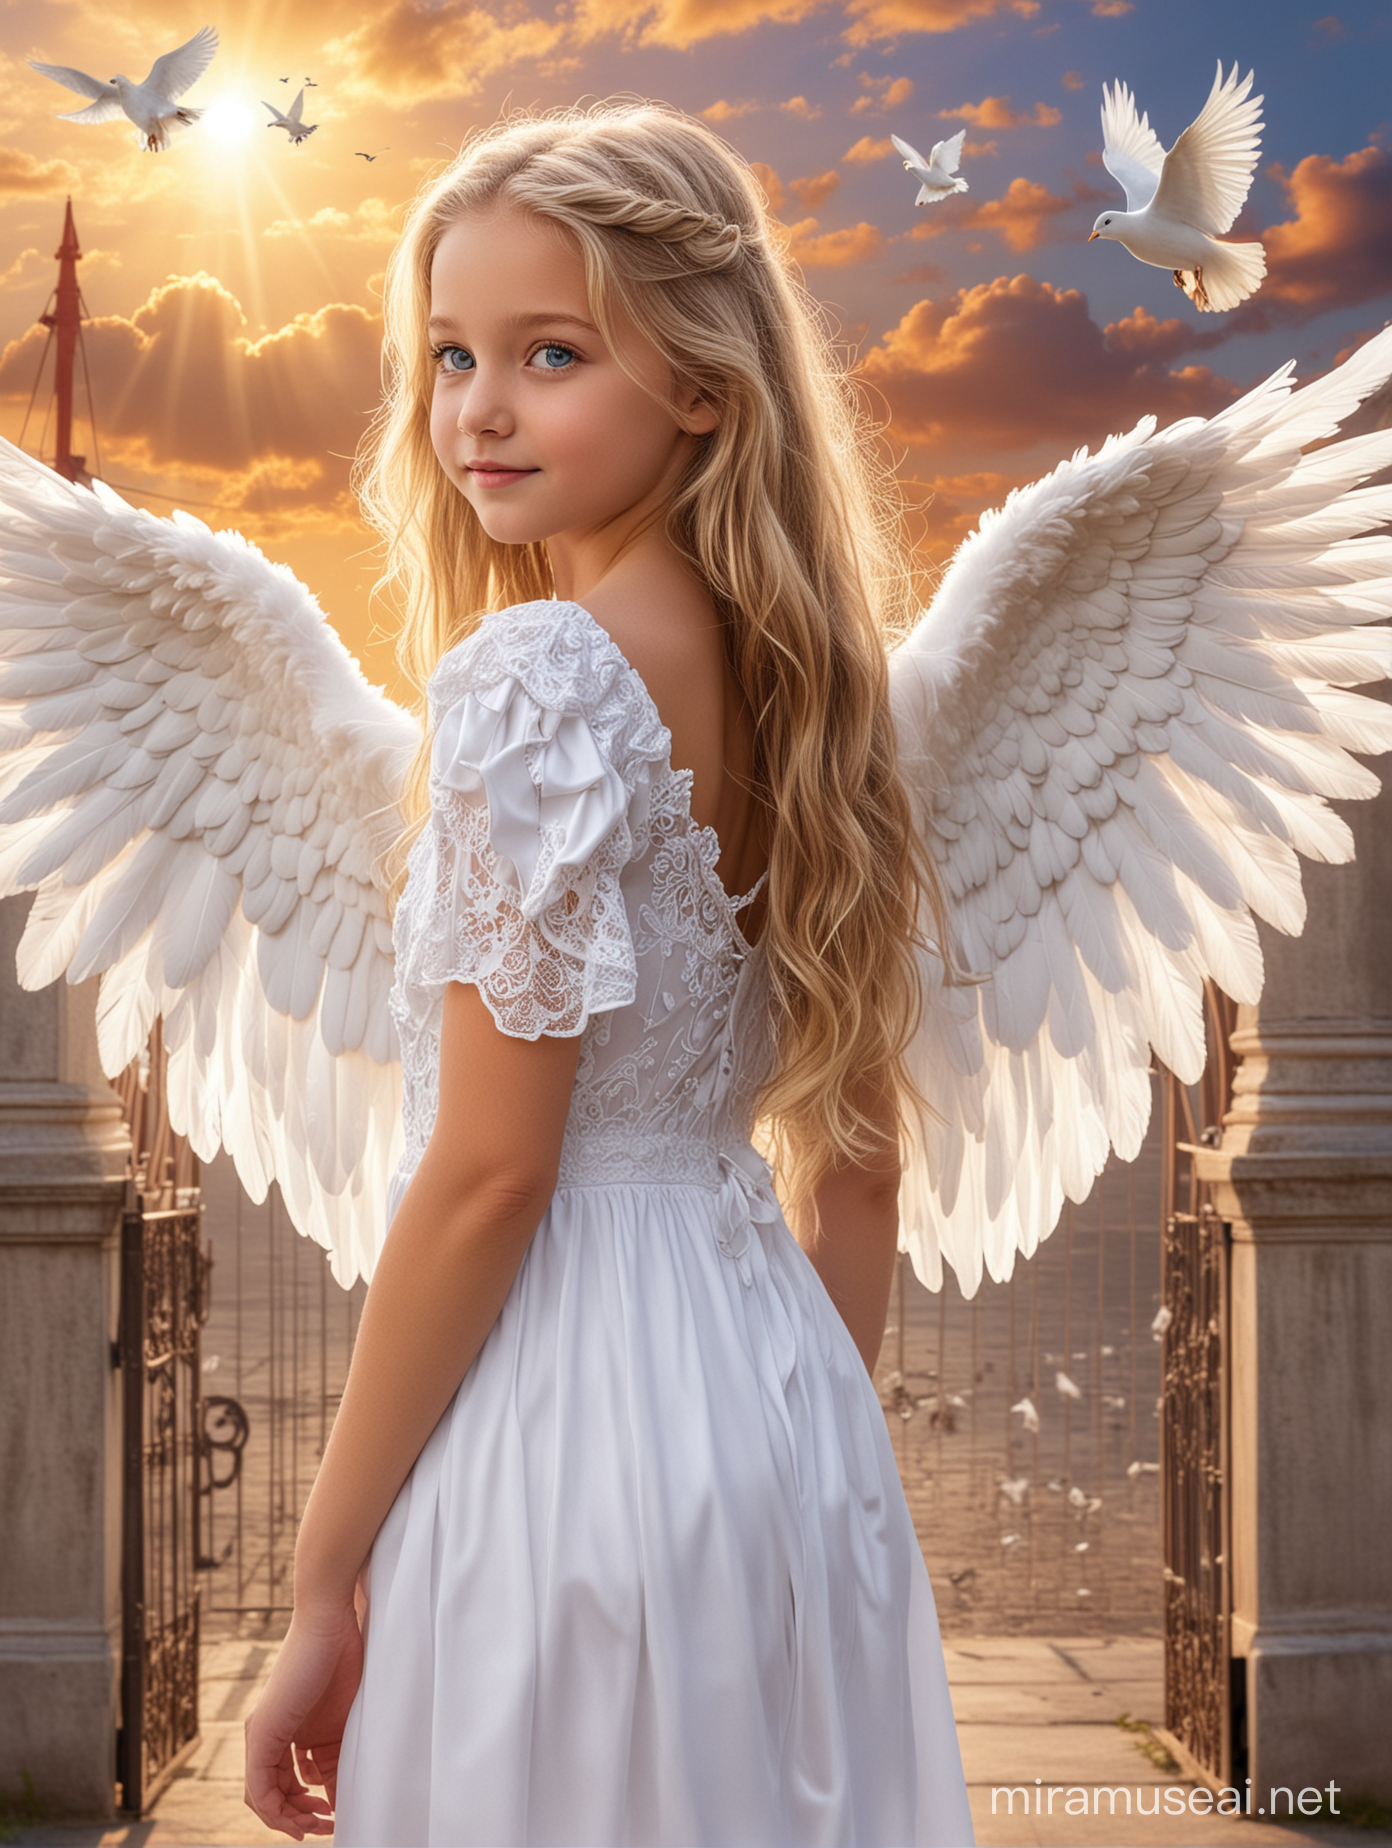 12 year old sweet cute adorable angel long straight wavy blonde hair blue eyes wearing a beautiful white dress and big white angel wings on her back heavenly background with golden gate and doves clouds very beautiful she is extremely cute 